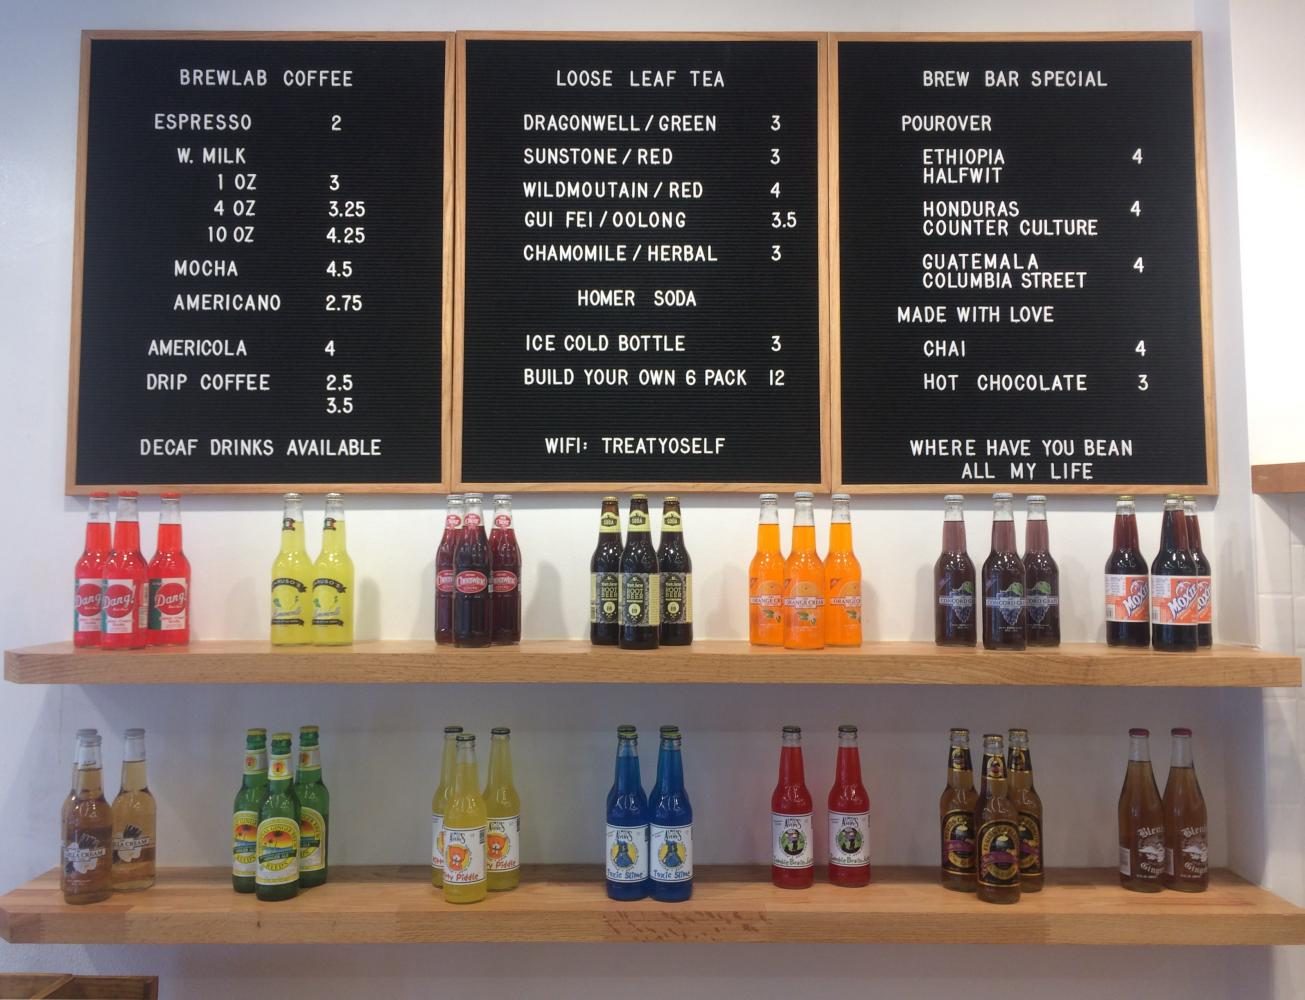 The menu at BrewLab sits above the stores craft soda bottles. BrewLab, recently opened and located in Campustown, serves specialty espresso drinks as well as craft soda. 